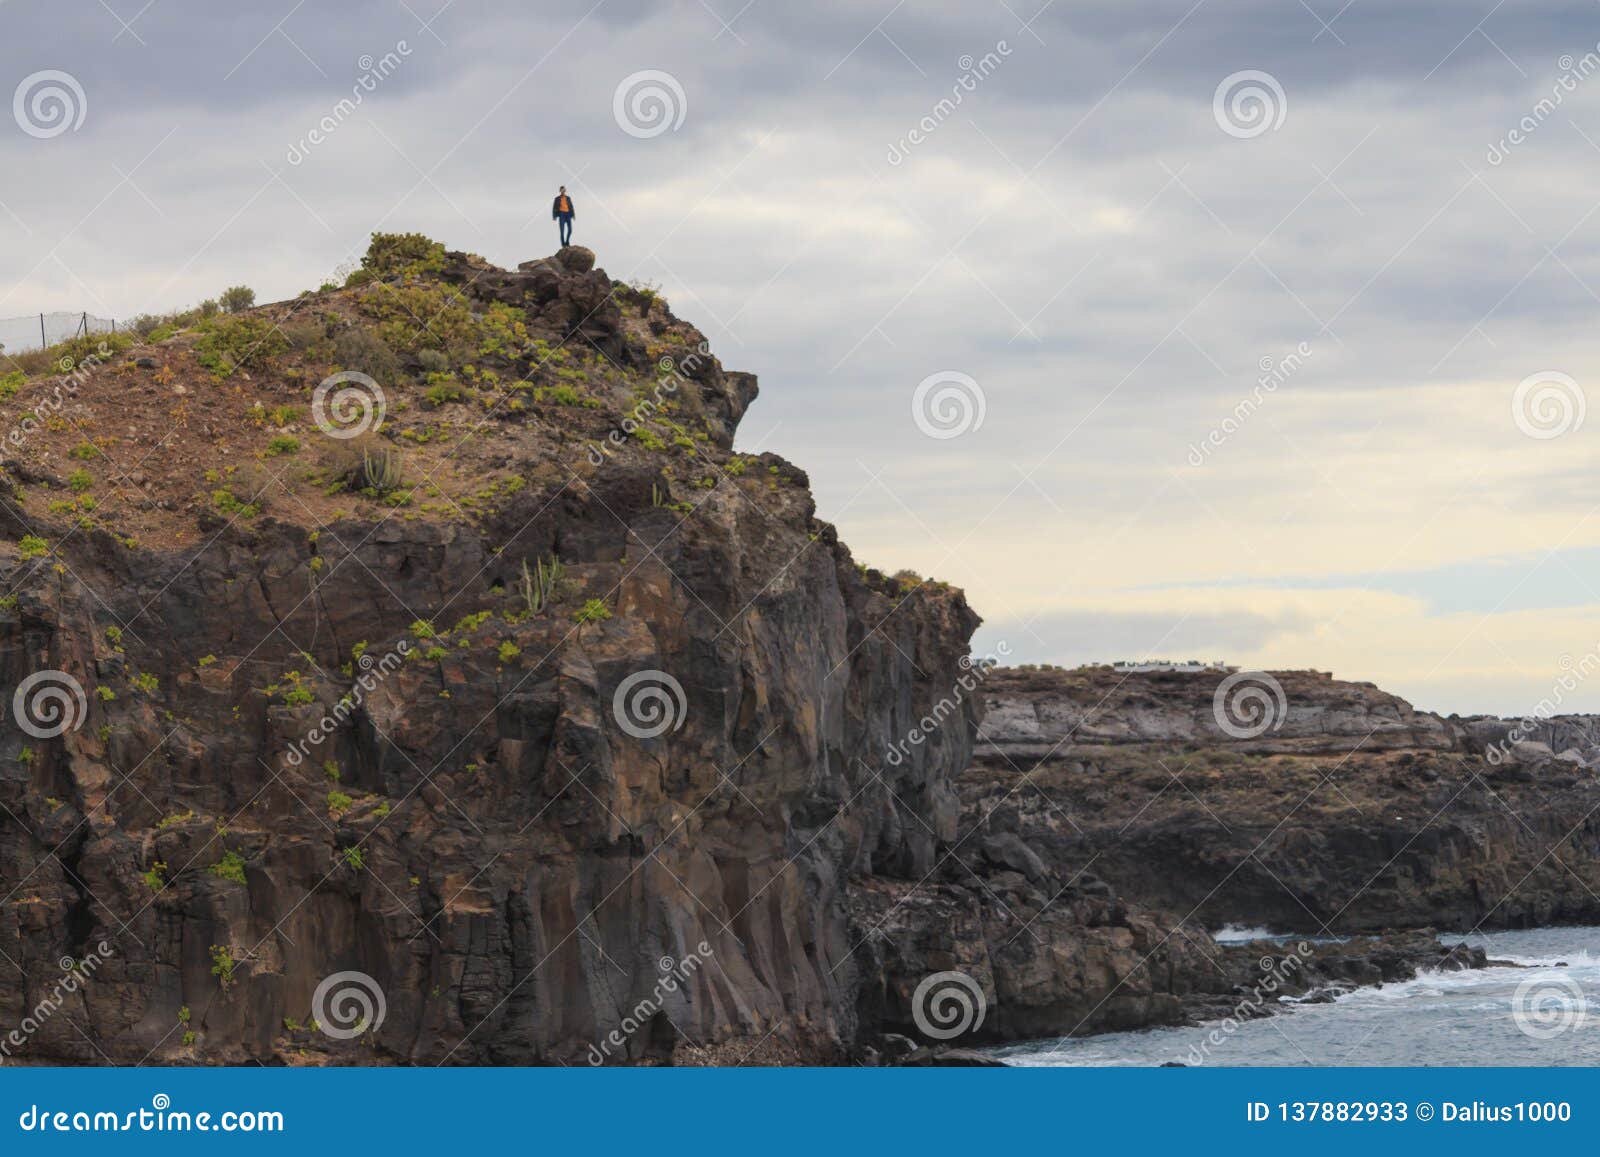 man standing on the edge of cliff callo salvaje, tenerife canary islands